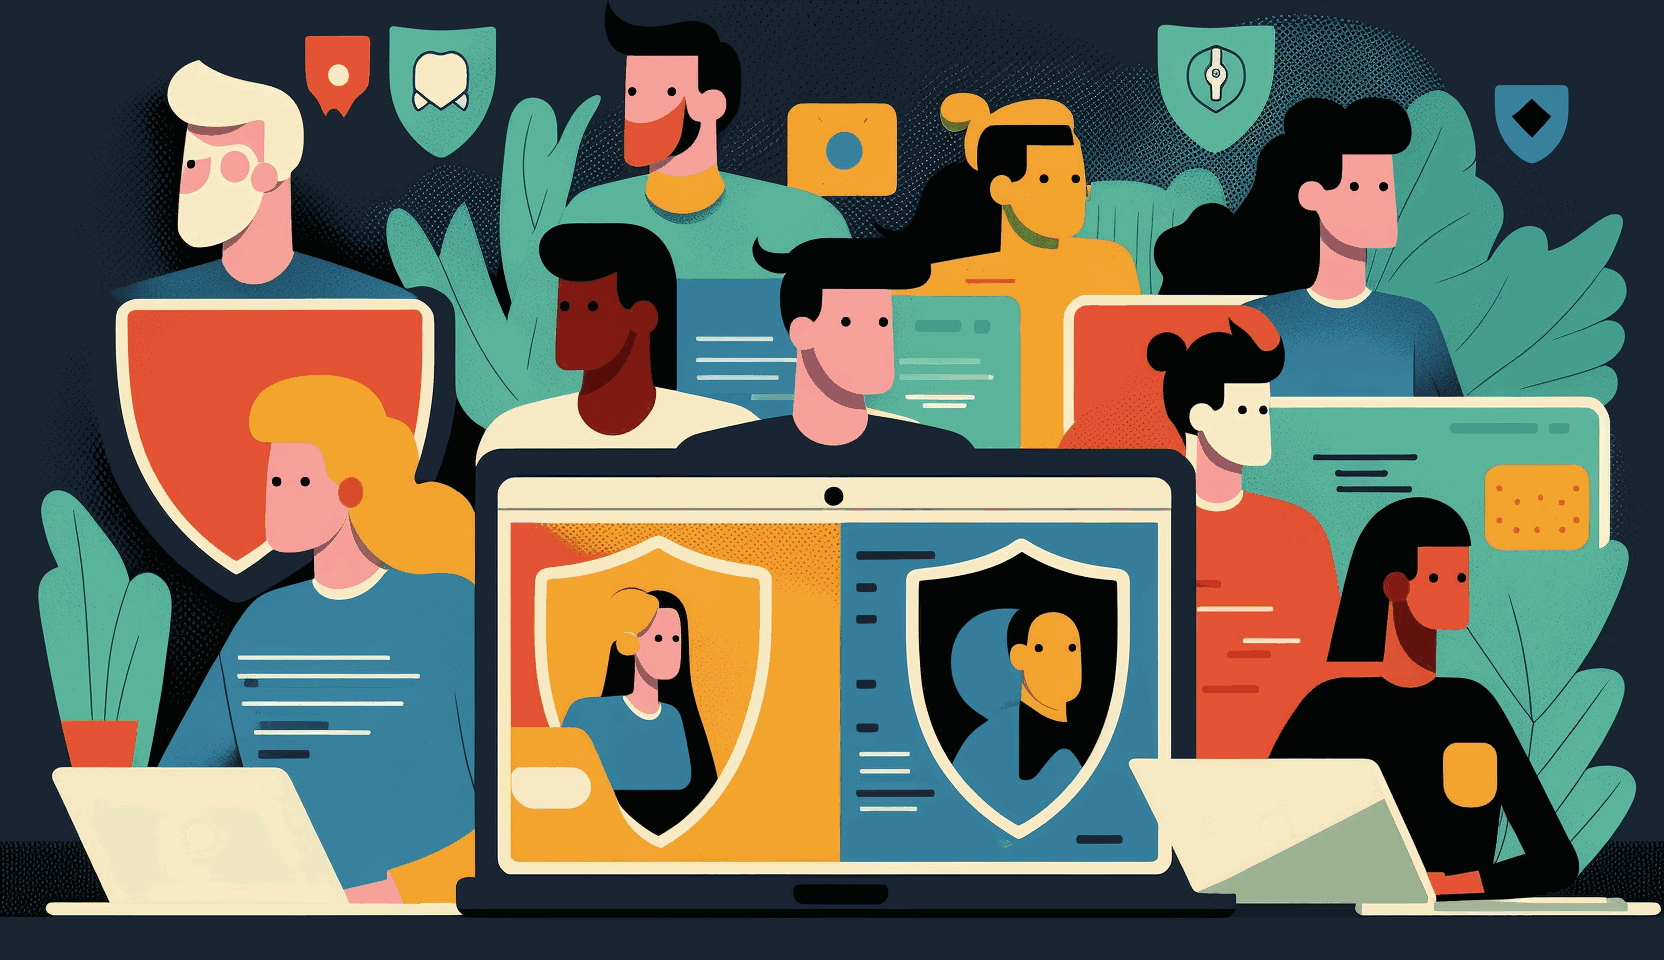 A cartoon image of a diverse group of remote employees participating in an engaging security awareness training session on their laptops, with various cybersecurity symbols surrounding them.